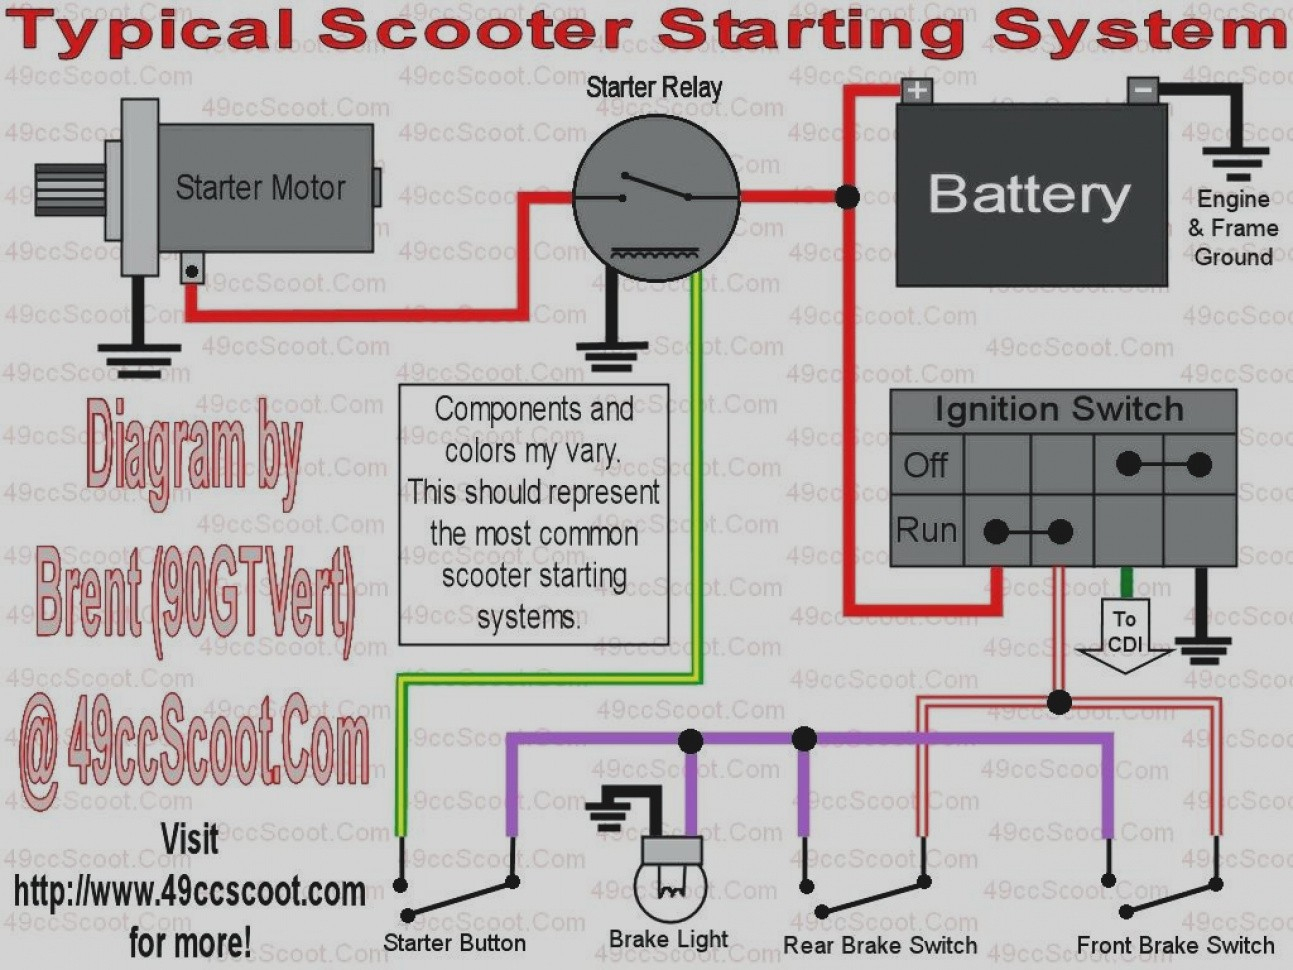 Scooter Ignition Wiring Diagram 27 Gallery Wiring Diagram Ignition - Scooter Ignition Wiring Diagram